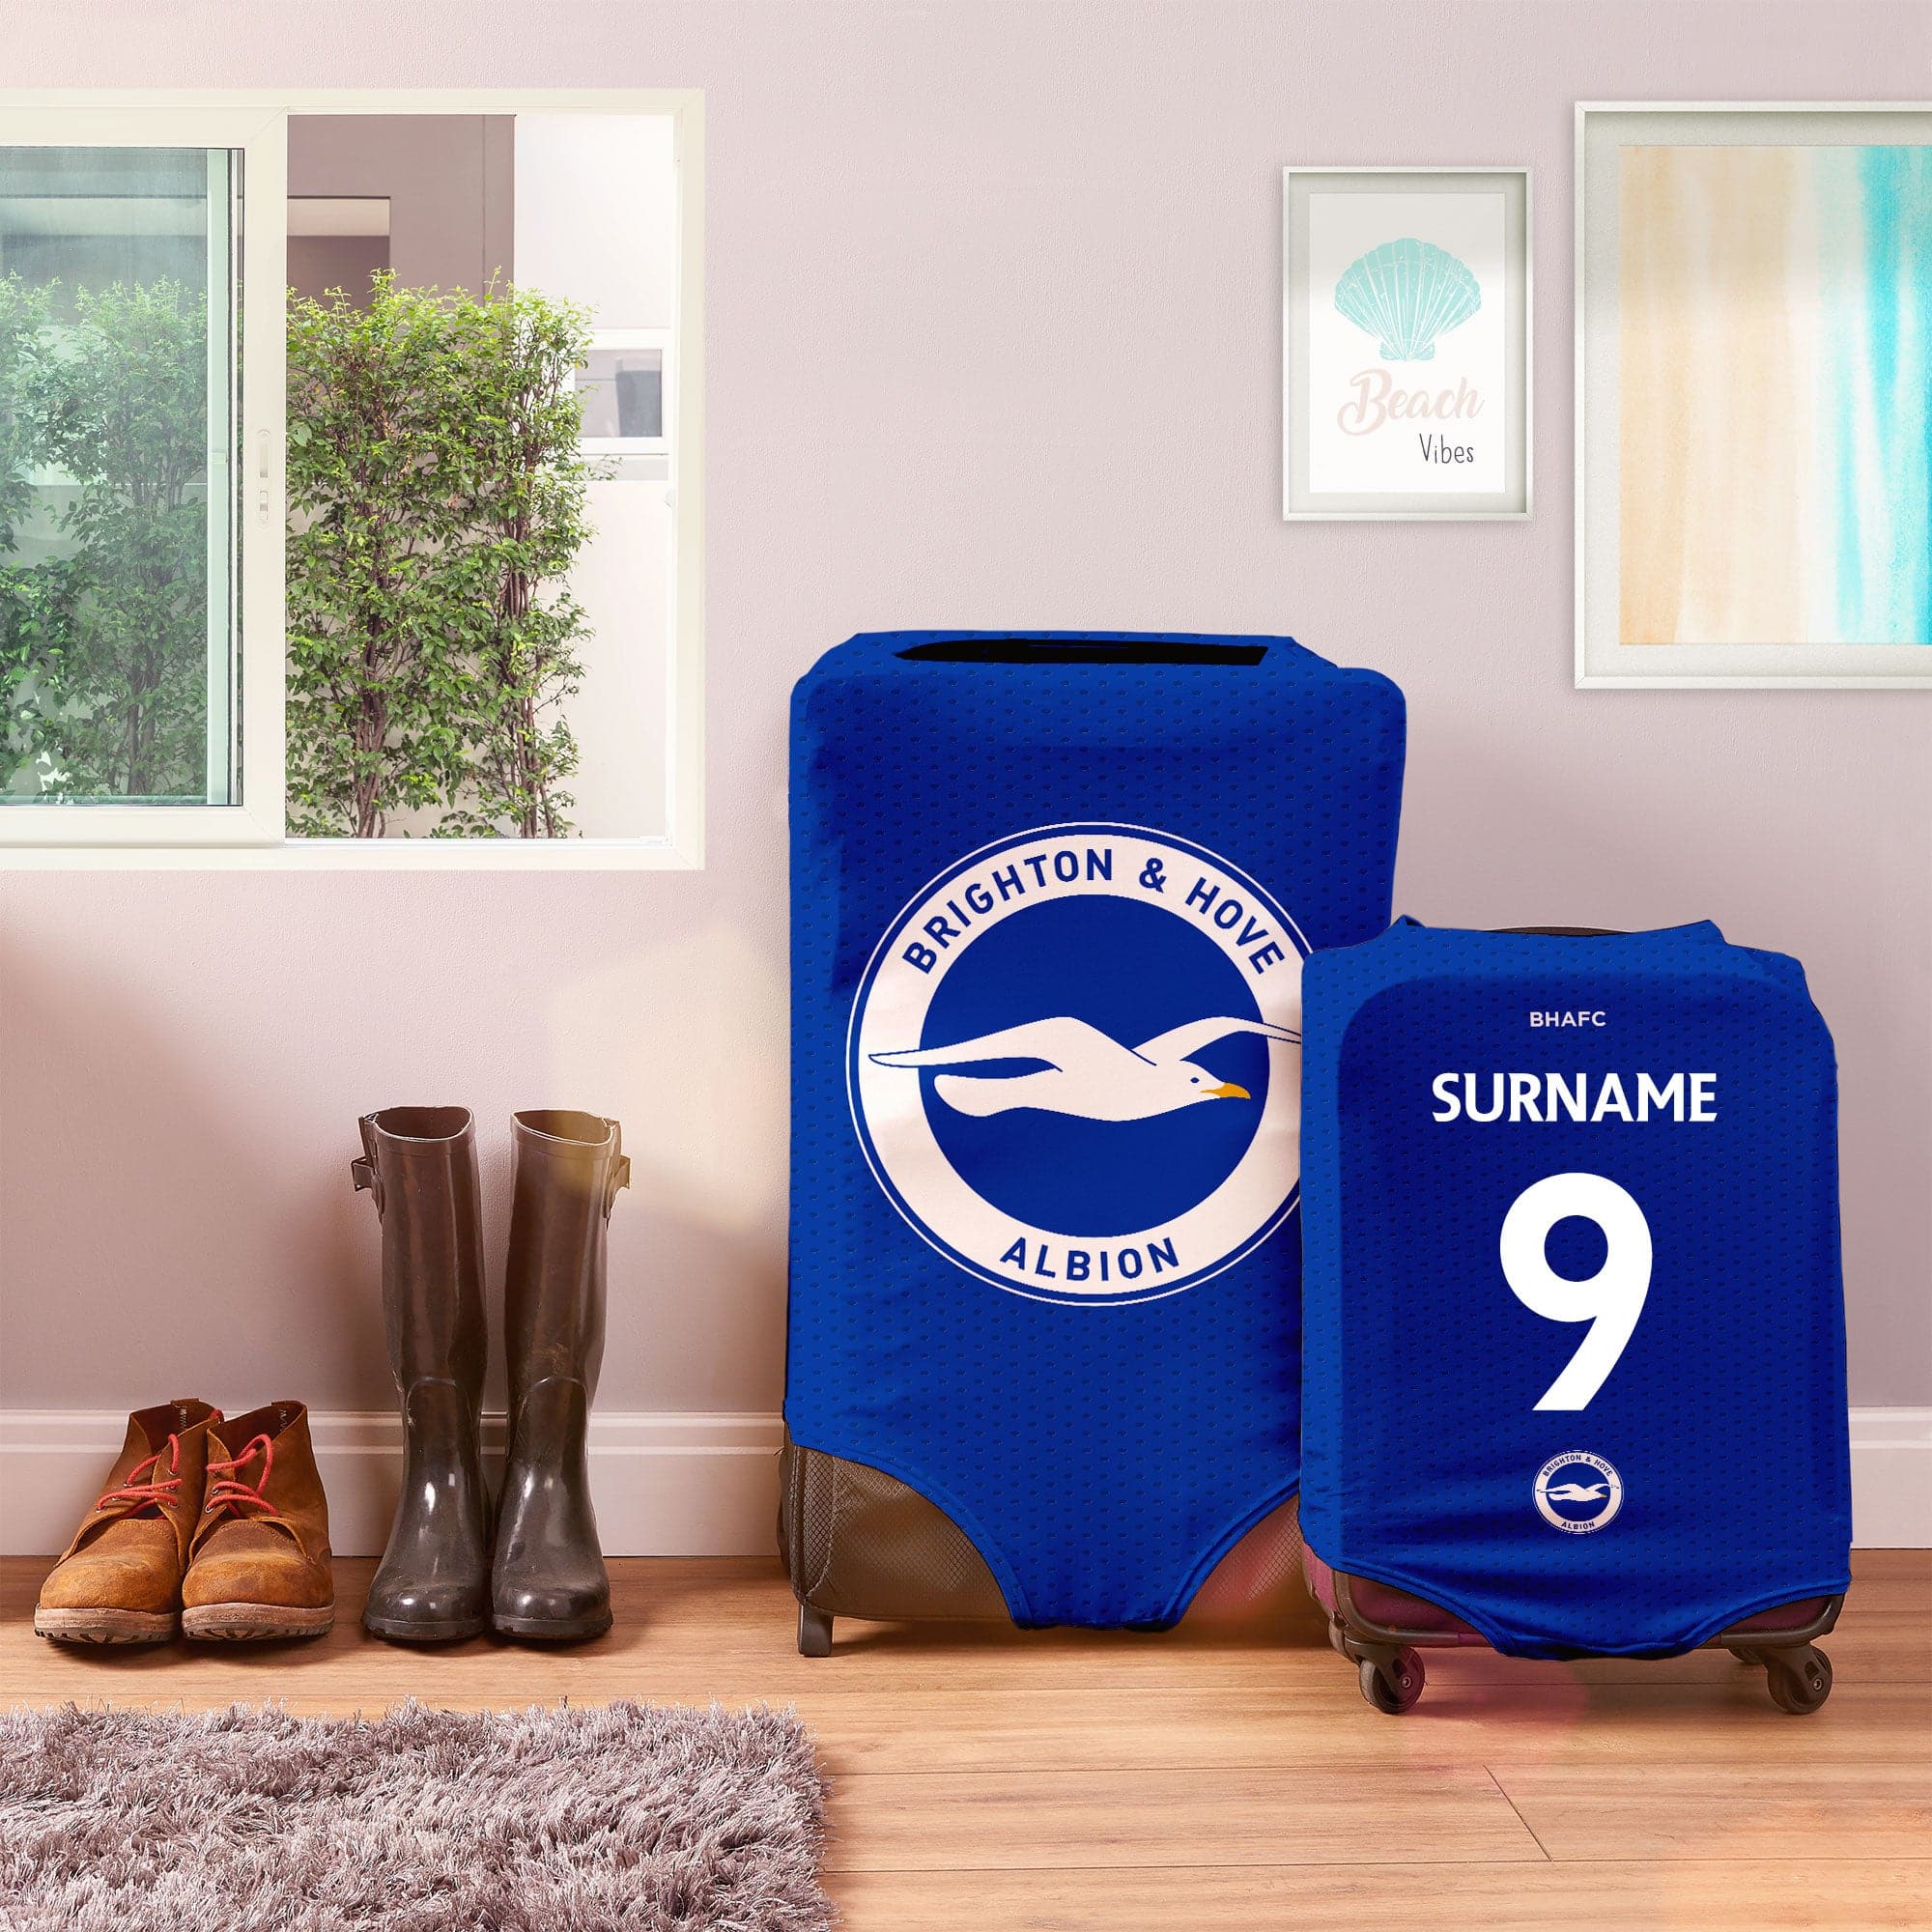 Brighton and Hove FC - Name and Number Caseskin Suitcase Cover - Officially Licenced